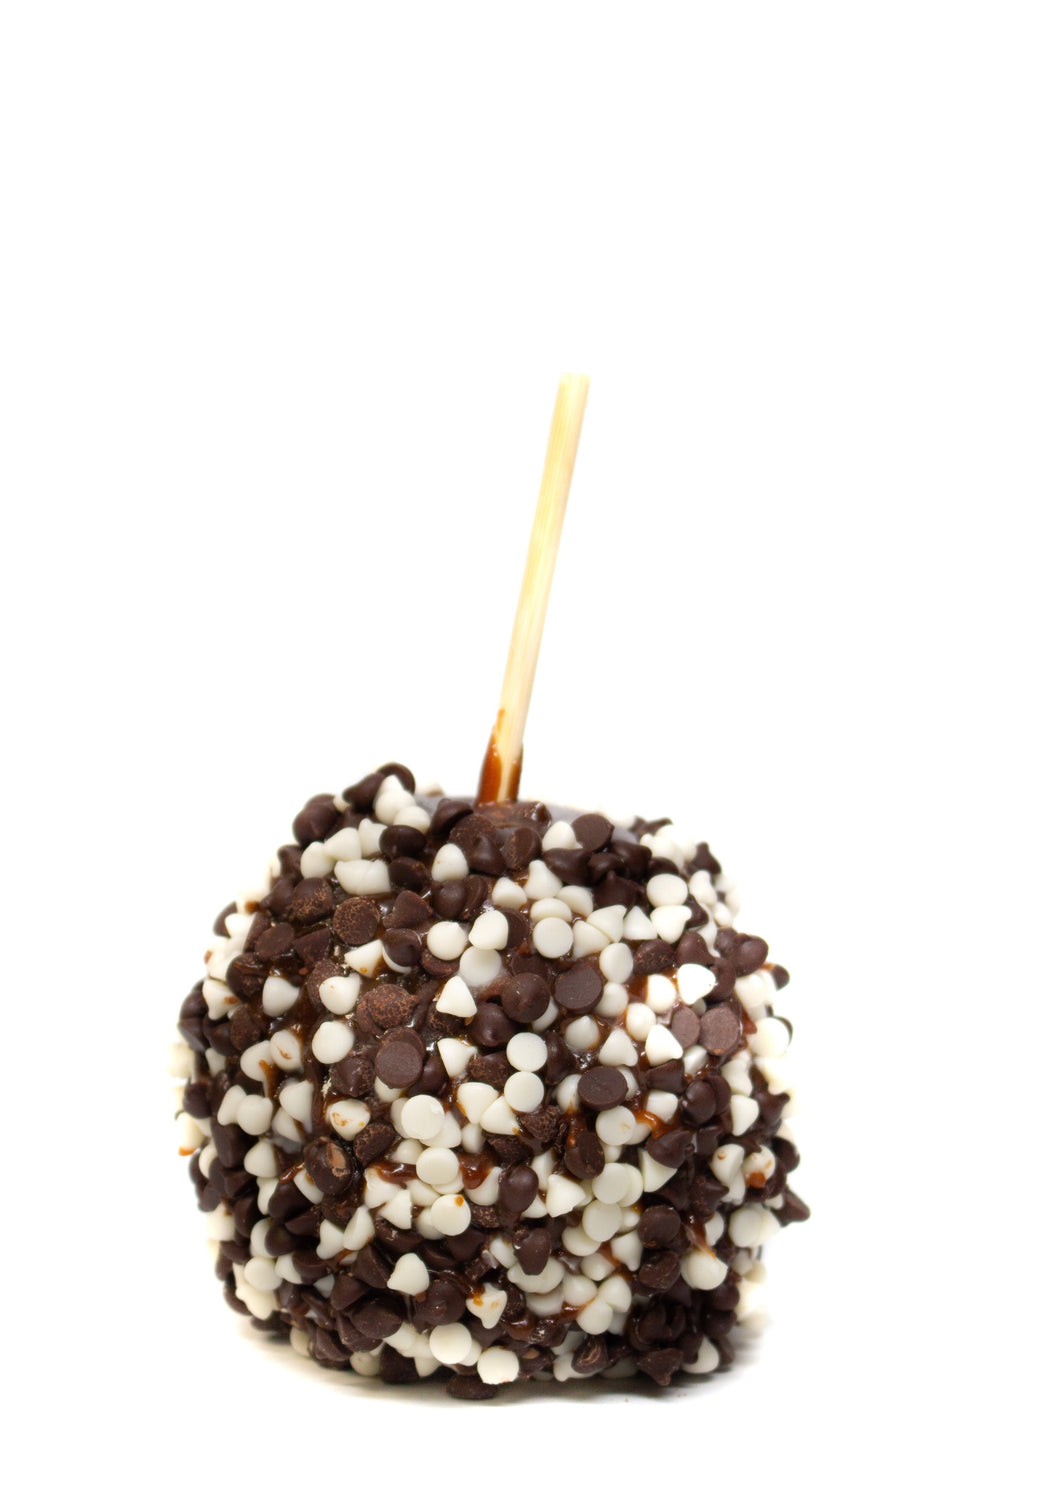 Hand Dipped Caramel Apple Rolled in Black & White Chocolate Chips